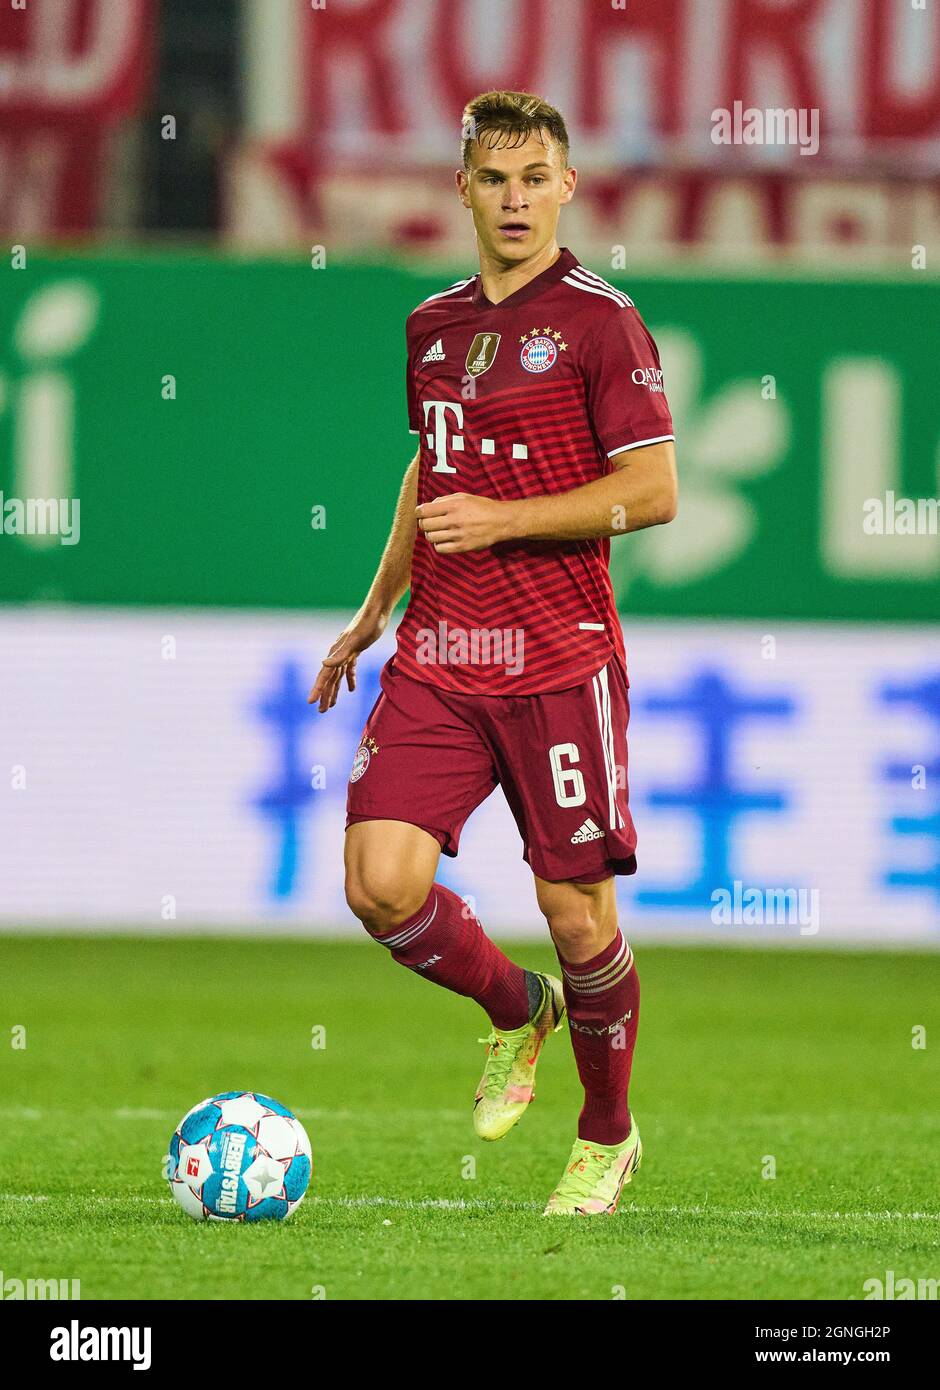 Joshua KIMMICH, FCB 6 in the match SpVgg GREUTHER FÜRTH - FC BAYERN MUENCHEN  1-3 1.German Football League on September 24, 2021 in Fuerth, Germany.  Season 2021/2022, matchday 7, 1.Bundesliga, FCB, München,